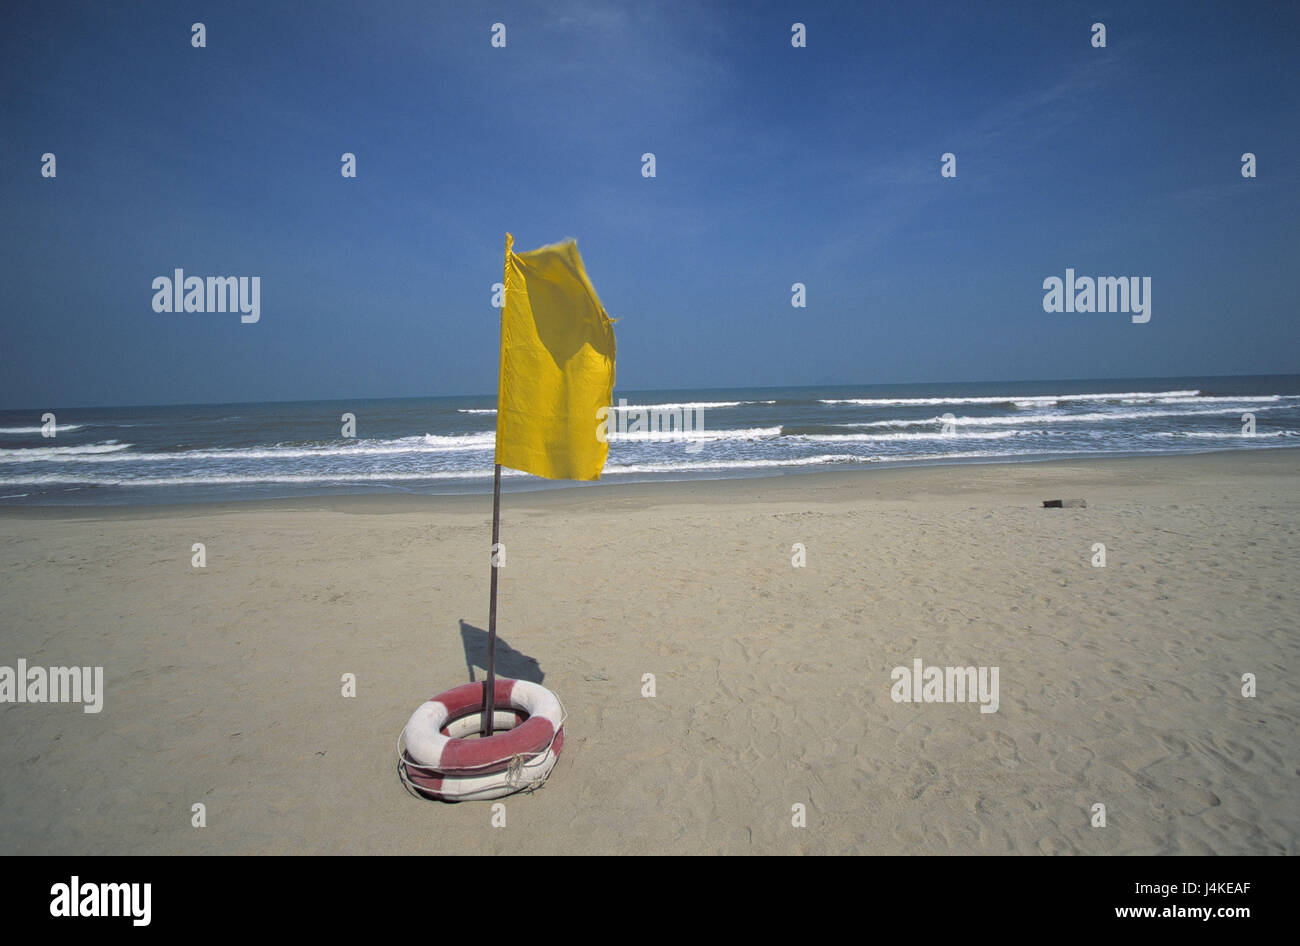 Vietnam, Hoi In, sandy beach, flag, lifebelts South-East Asia, central Vietnam, province of Quang Nam, port, beach, Sand, rescue tyre, emergency, help, rescue, life rescue, security, attention, tip, deserted, width, distance Stock Photo